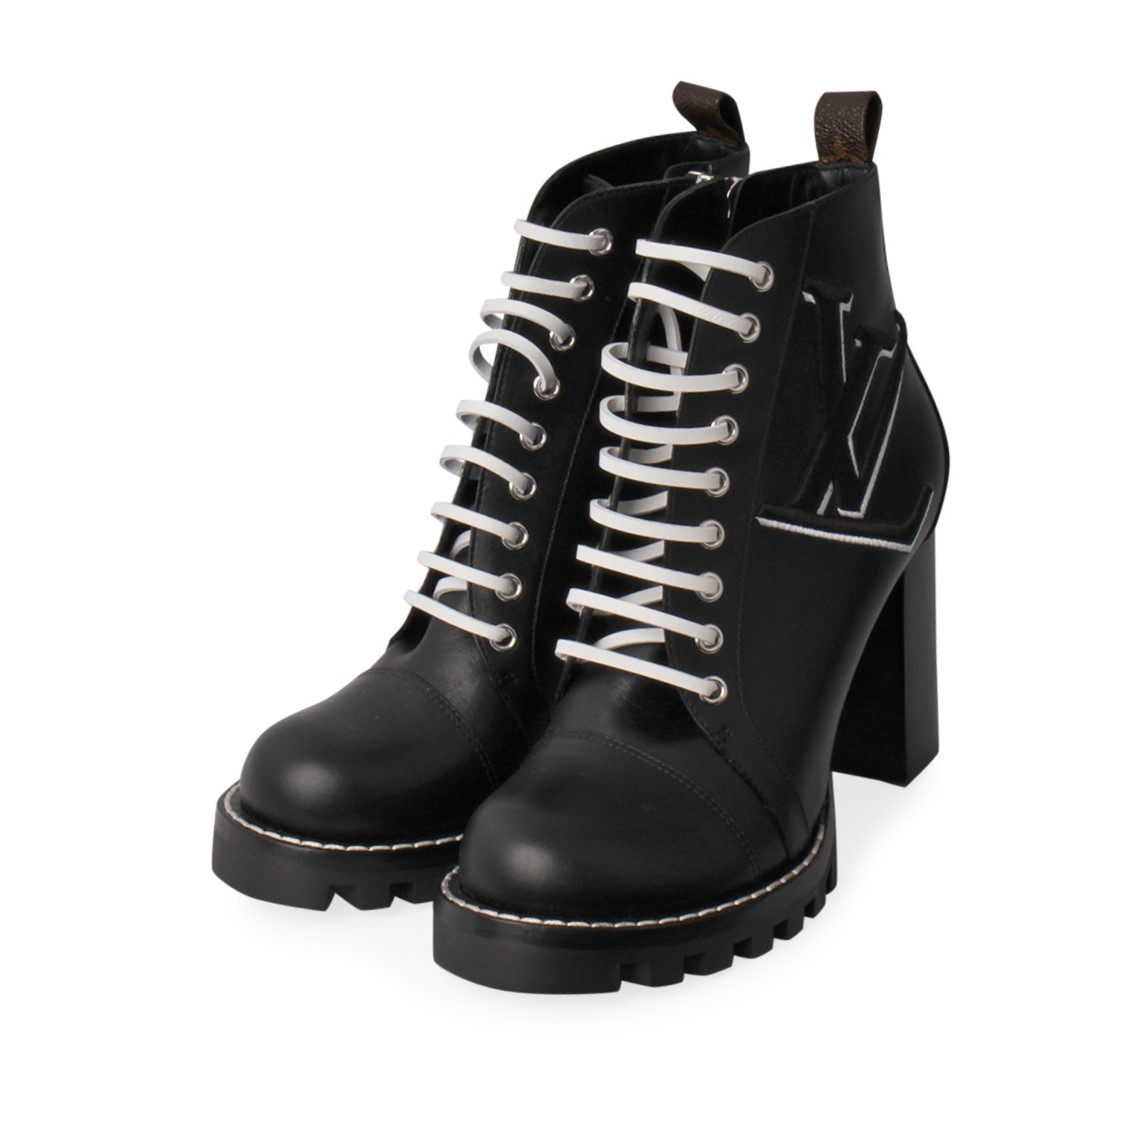 star trail ankle boot price